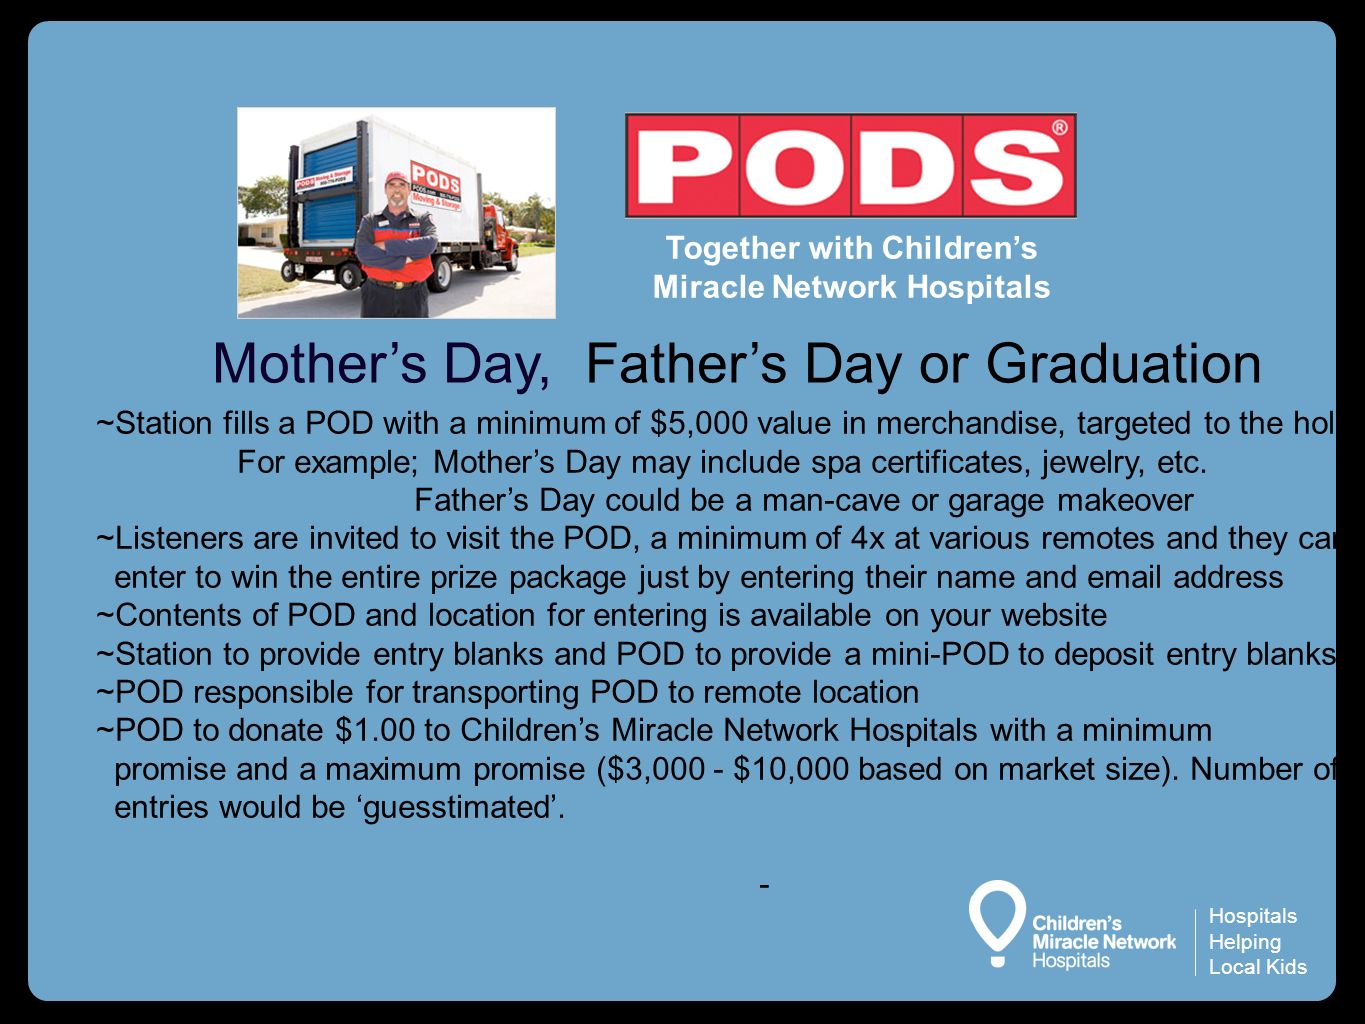 Hospitals Helping Local Kids Together with Children’s Miracle Network Hospitals Mother’s Day, Father’s Day or Graduation ~Station fills a POD with a minimum of $5,000 value in merchandise, targeted to the holiday.